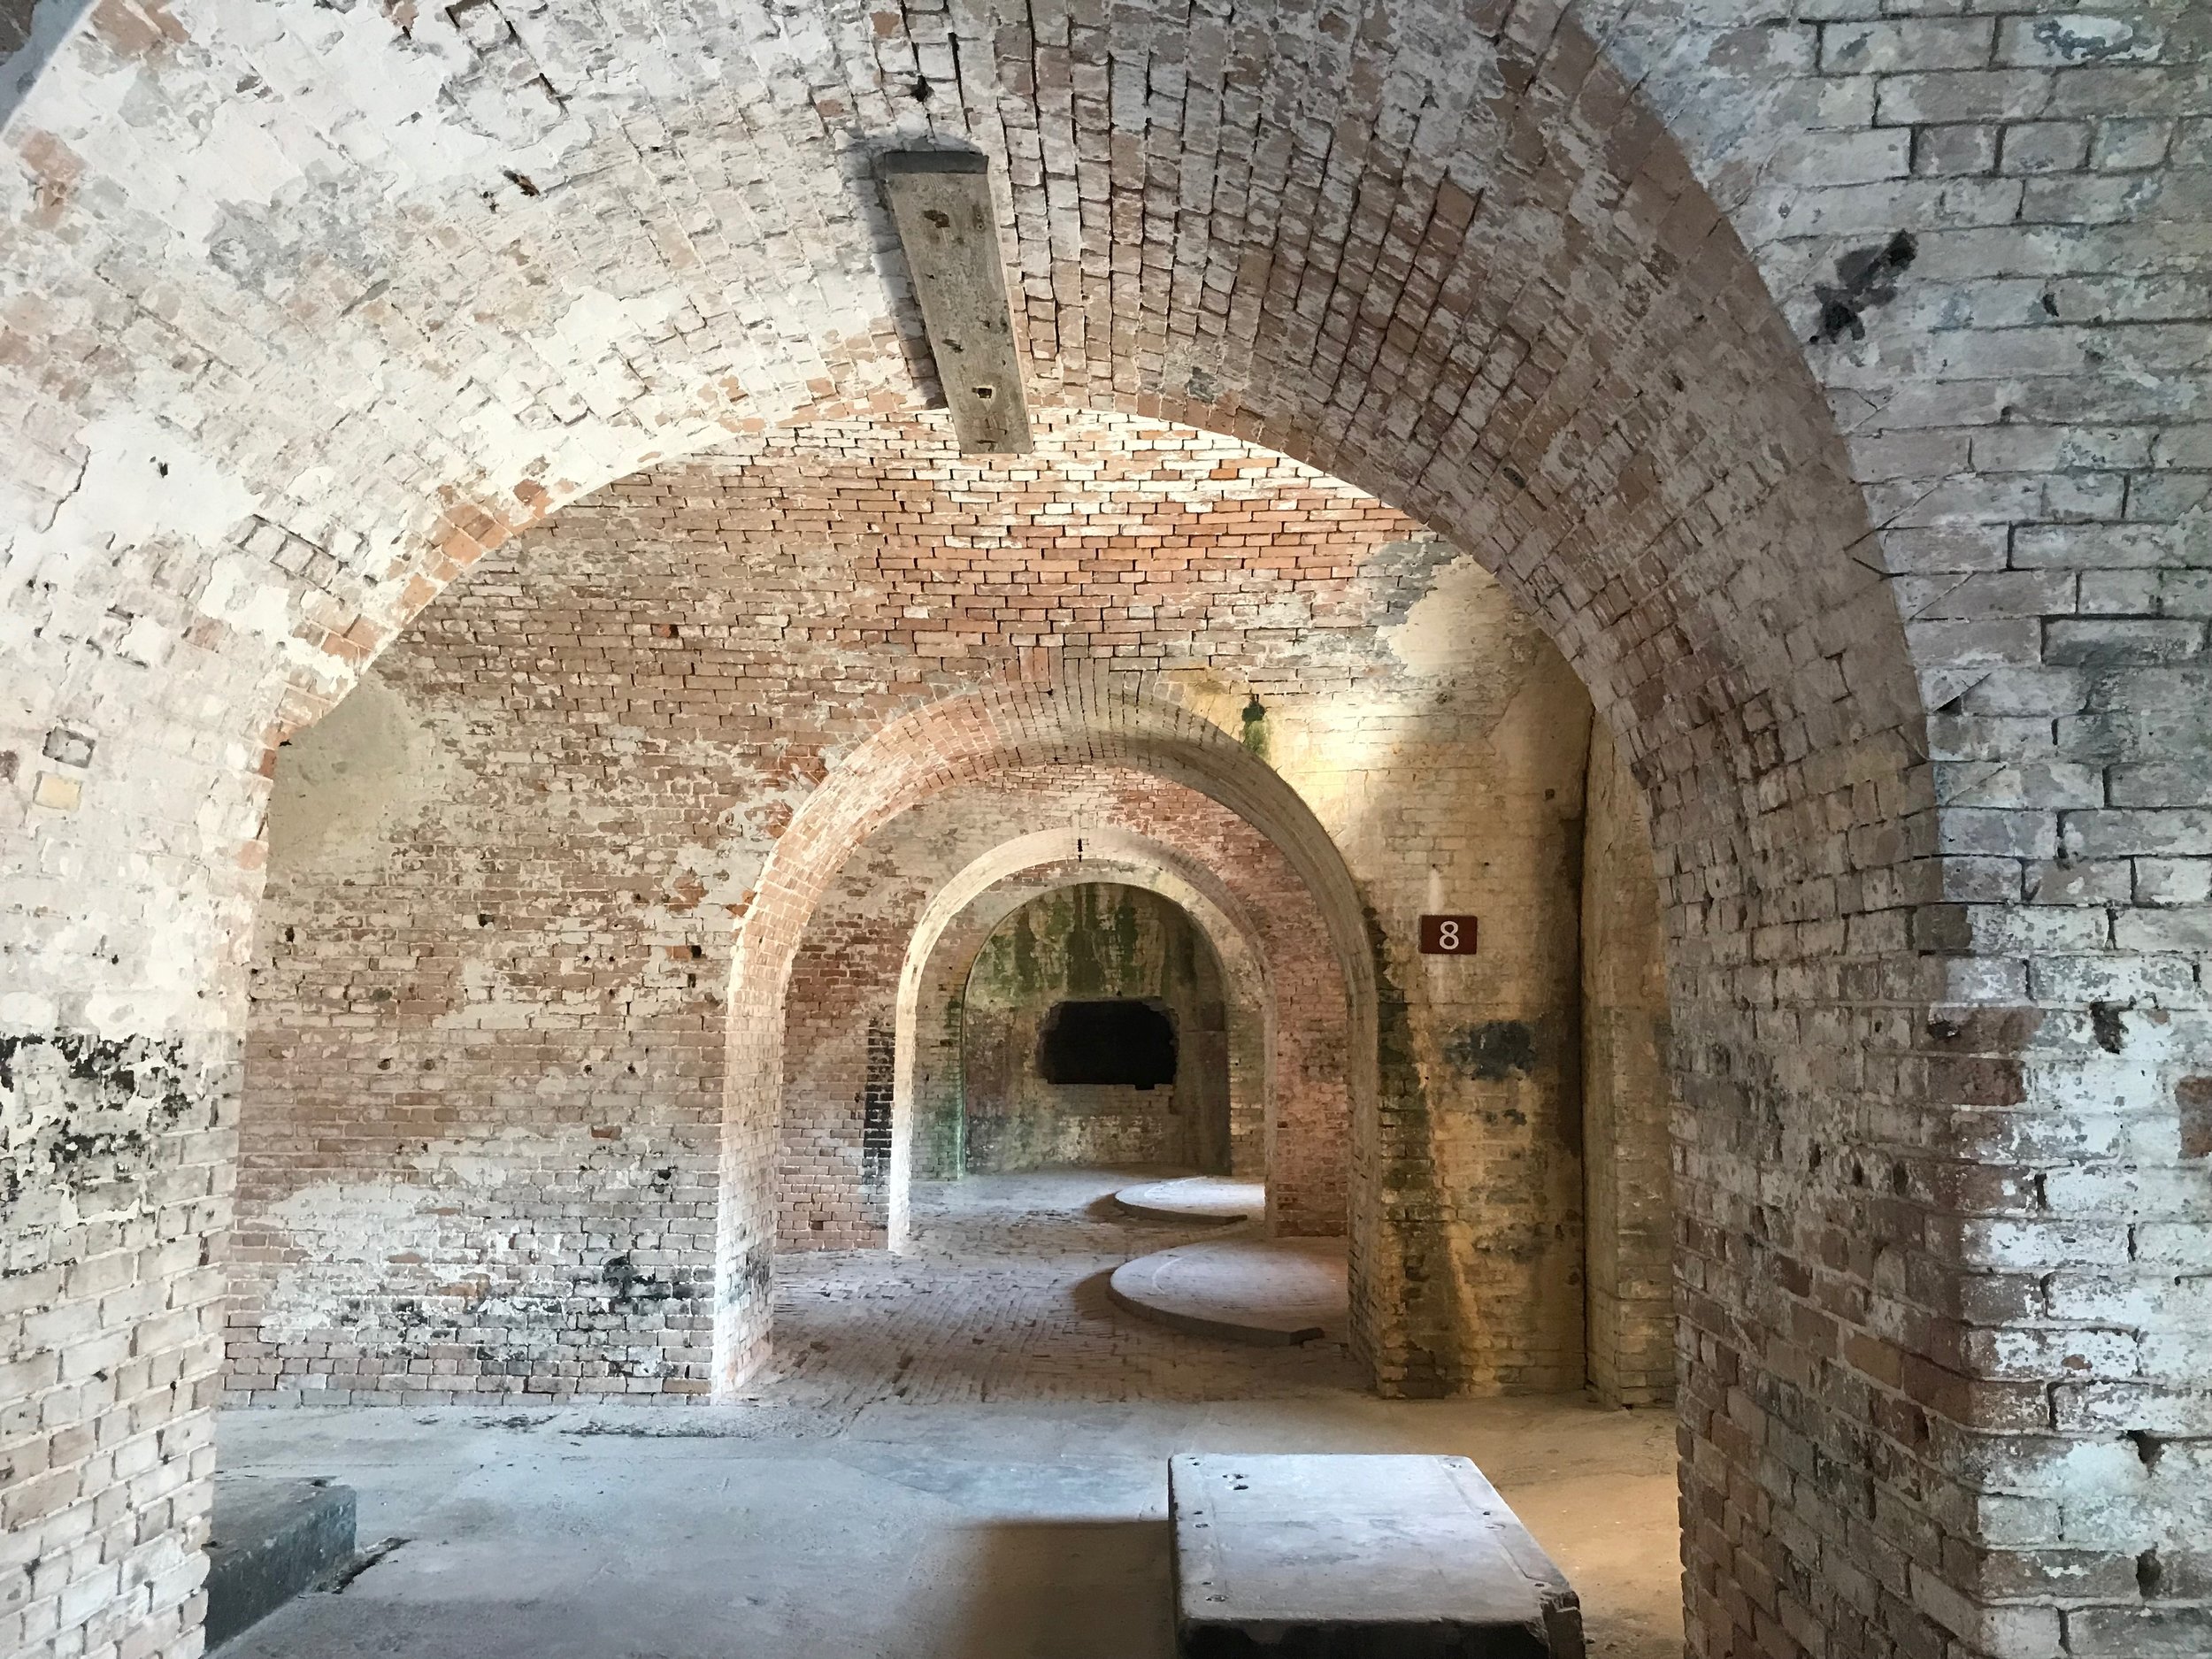  Fort Pickens was built to protect the entrance to Pensacola Bay. 